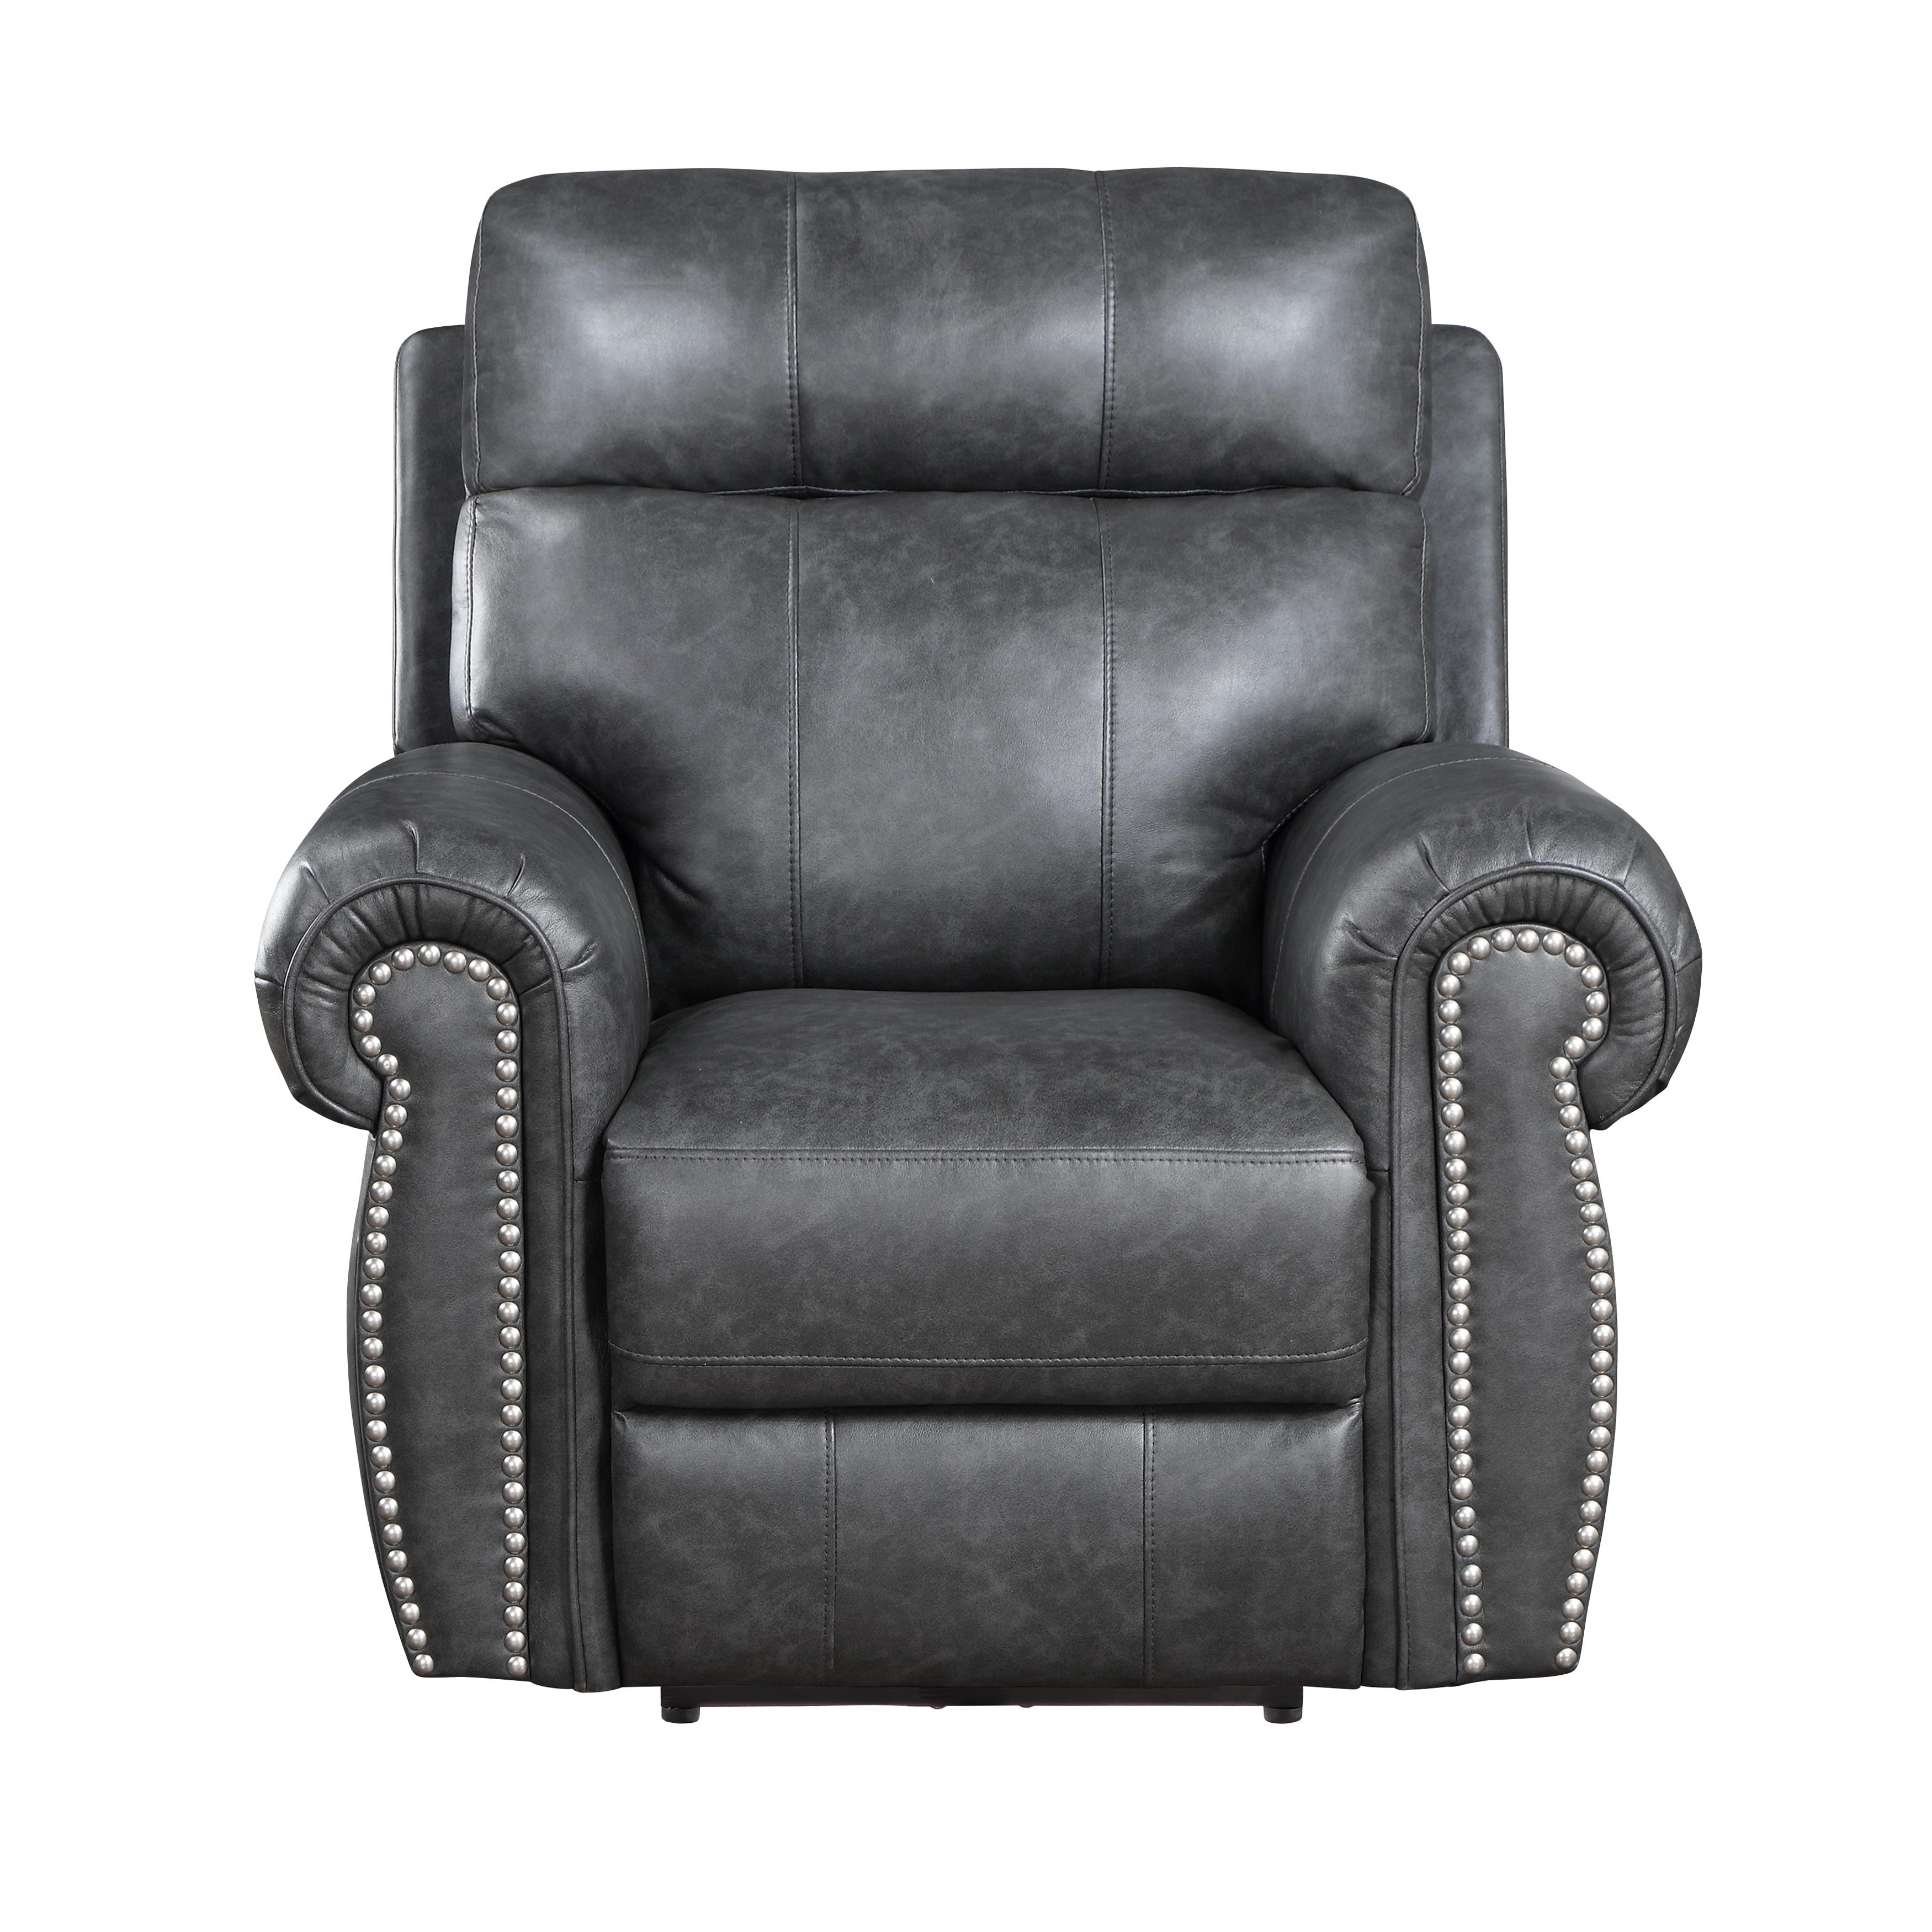 Transitional Power Reclining Chair 9488GY-1PW Granville 9488GY-1PW in Gray Suede